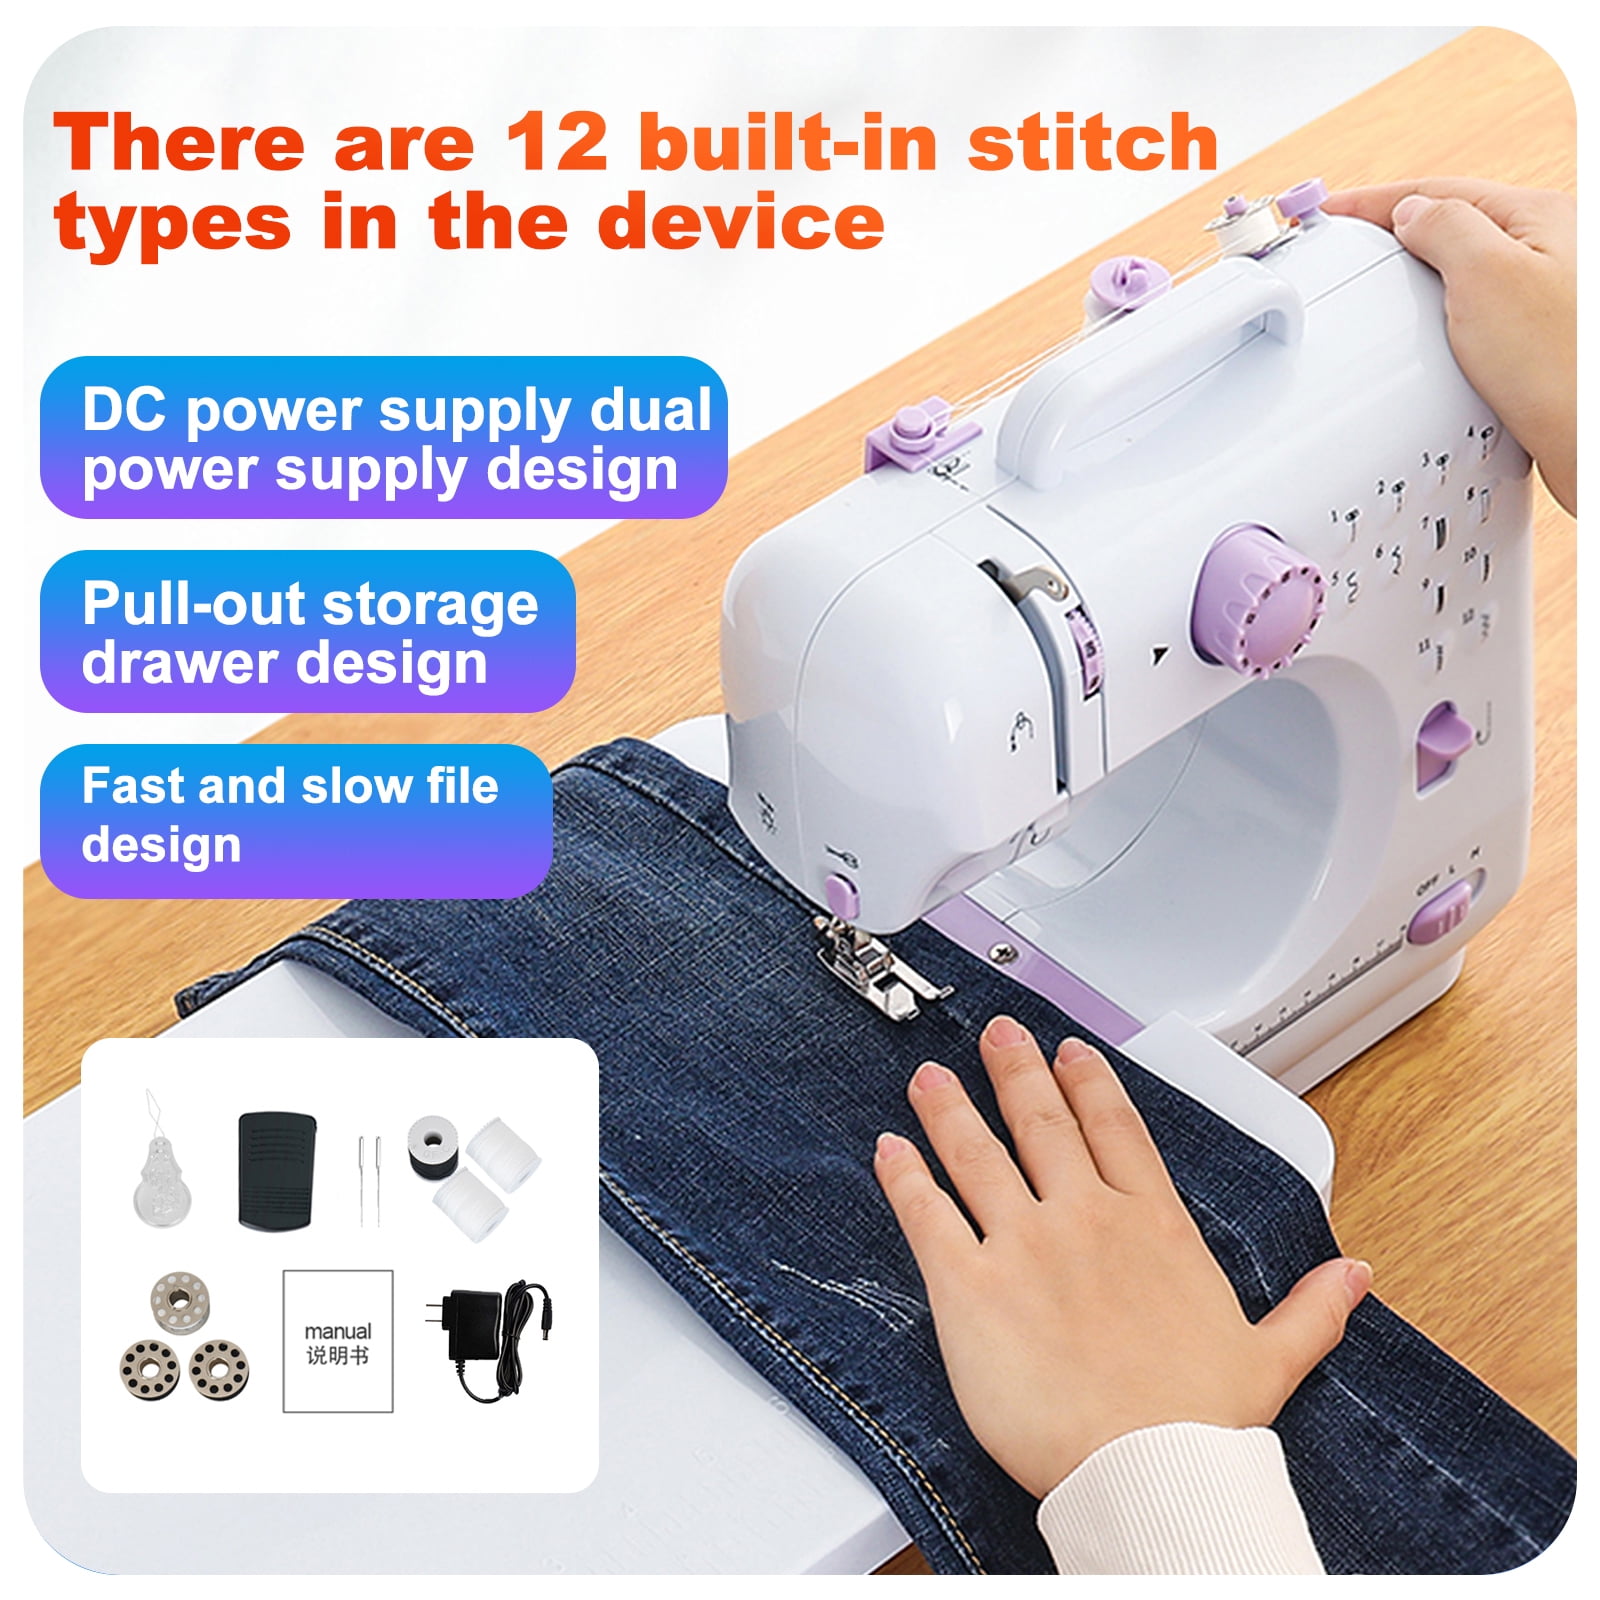 TALERLUV Sewing Machine for Beginners, Kids & Adults - 12 Stitch Applications, 7 Presser Feet, Extension Table, Foot Pedal, LED Light